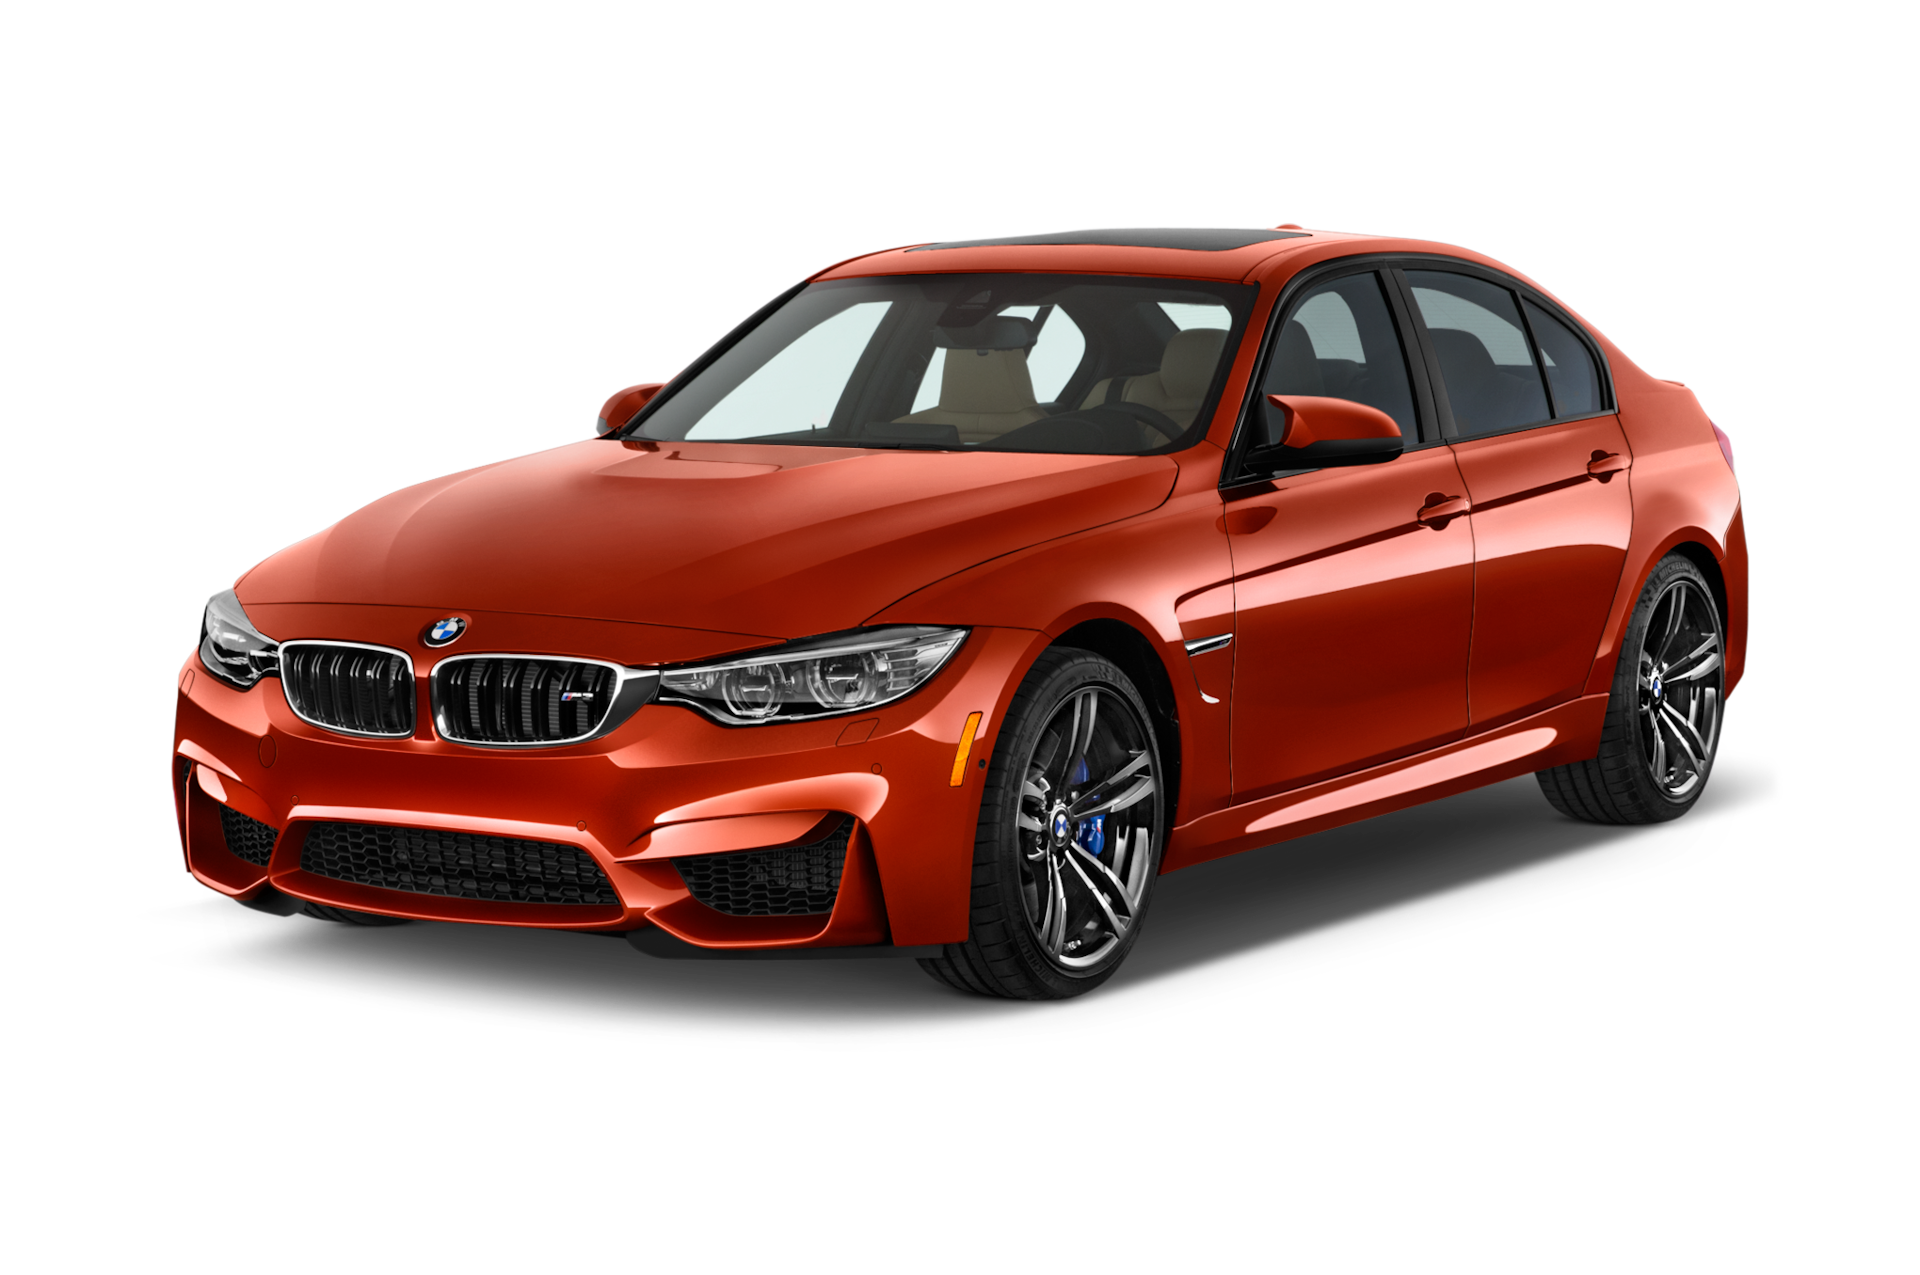 2015 BMW M3 Prices, Reviews, and Photos - MotorTrend